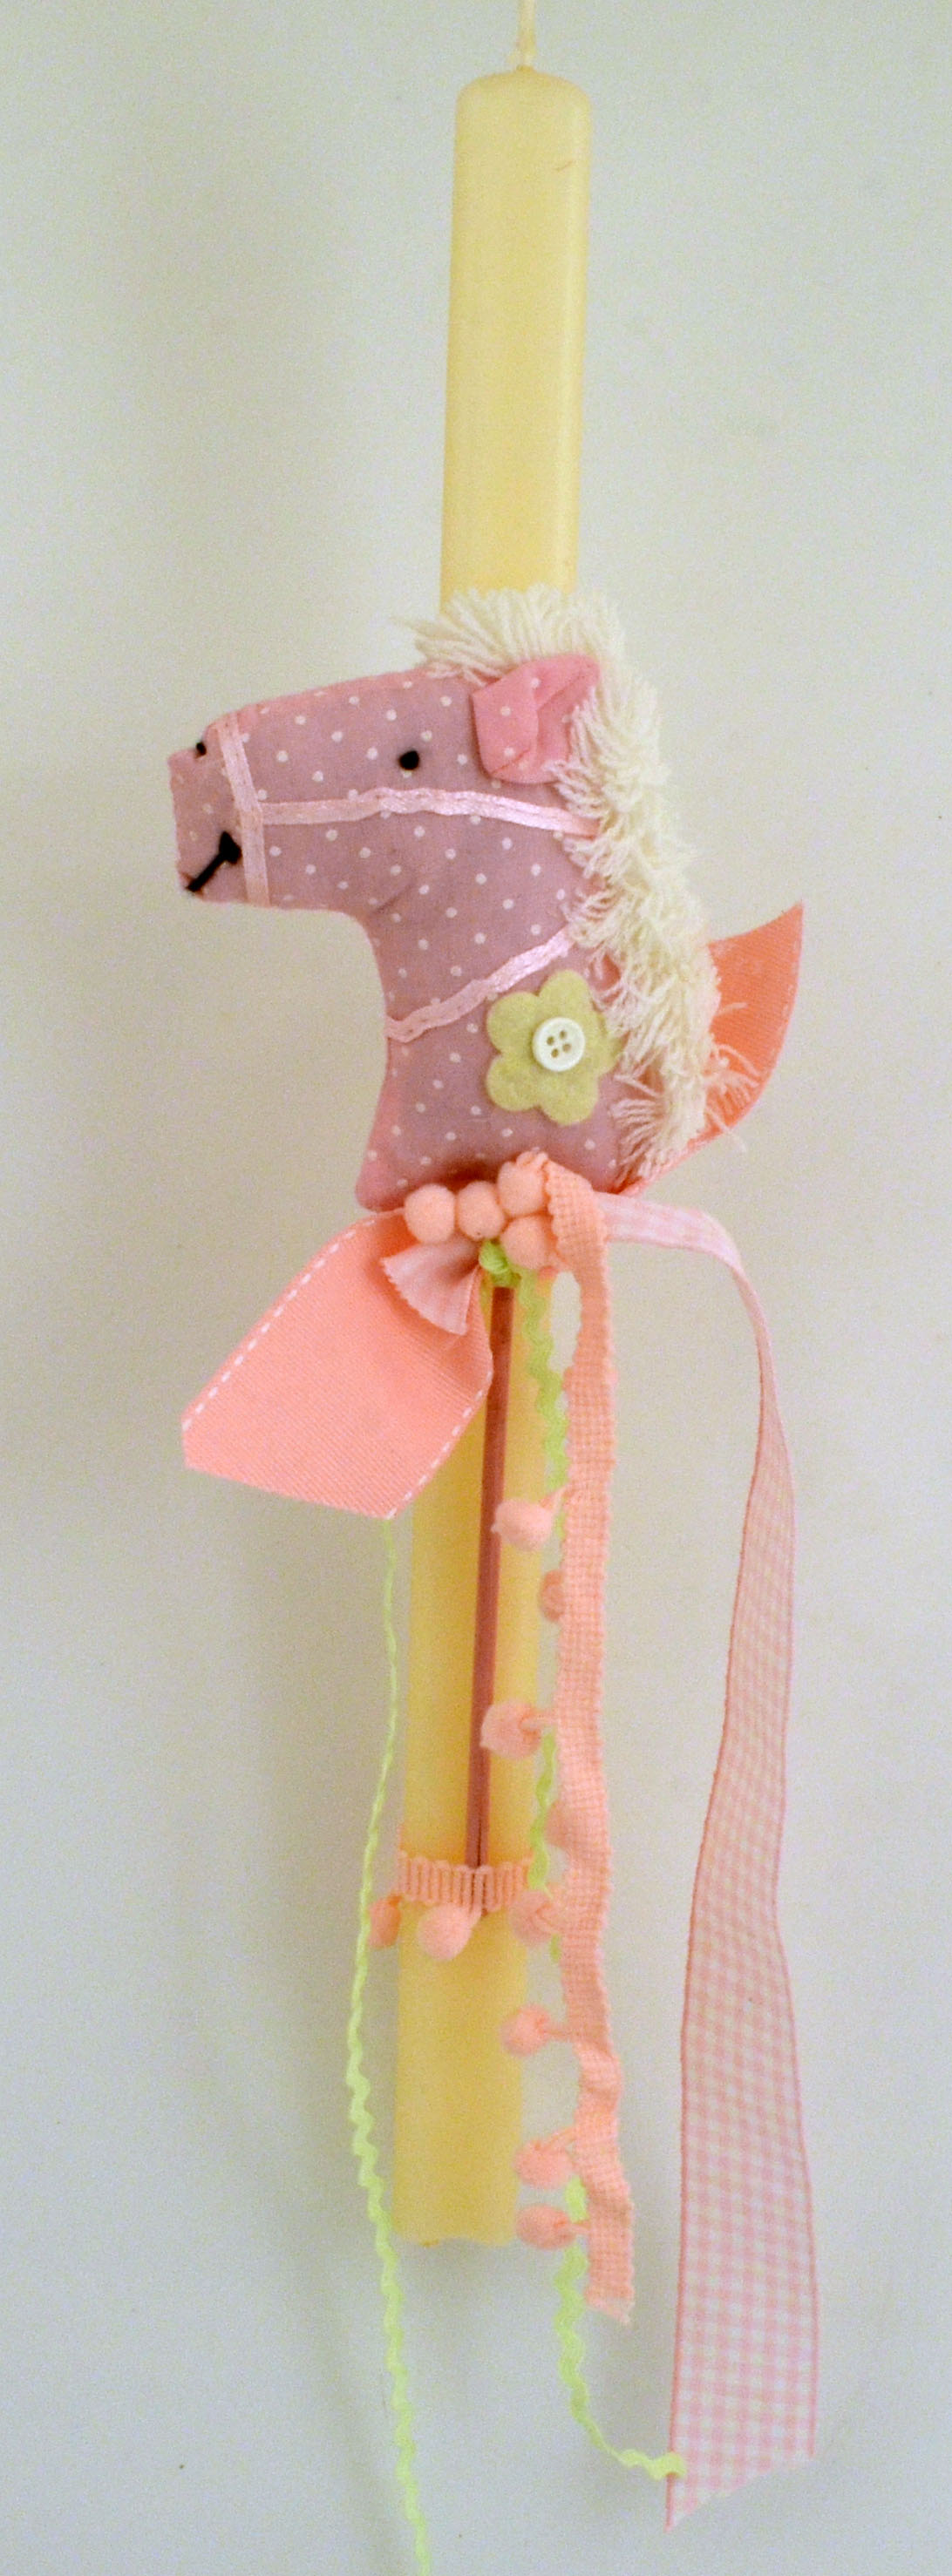 Easter Lampada Candle Kids with Toy Fabric Horse 40cm